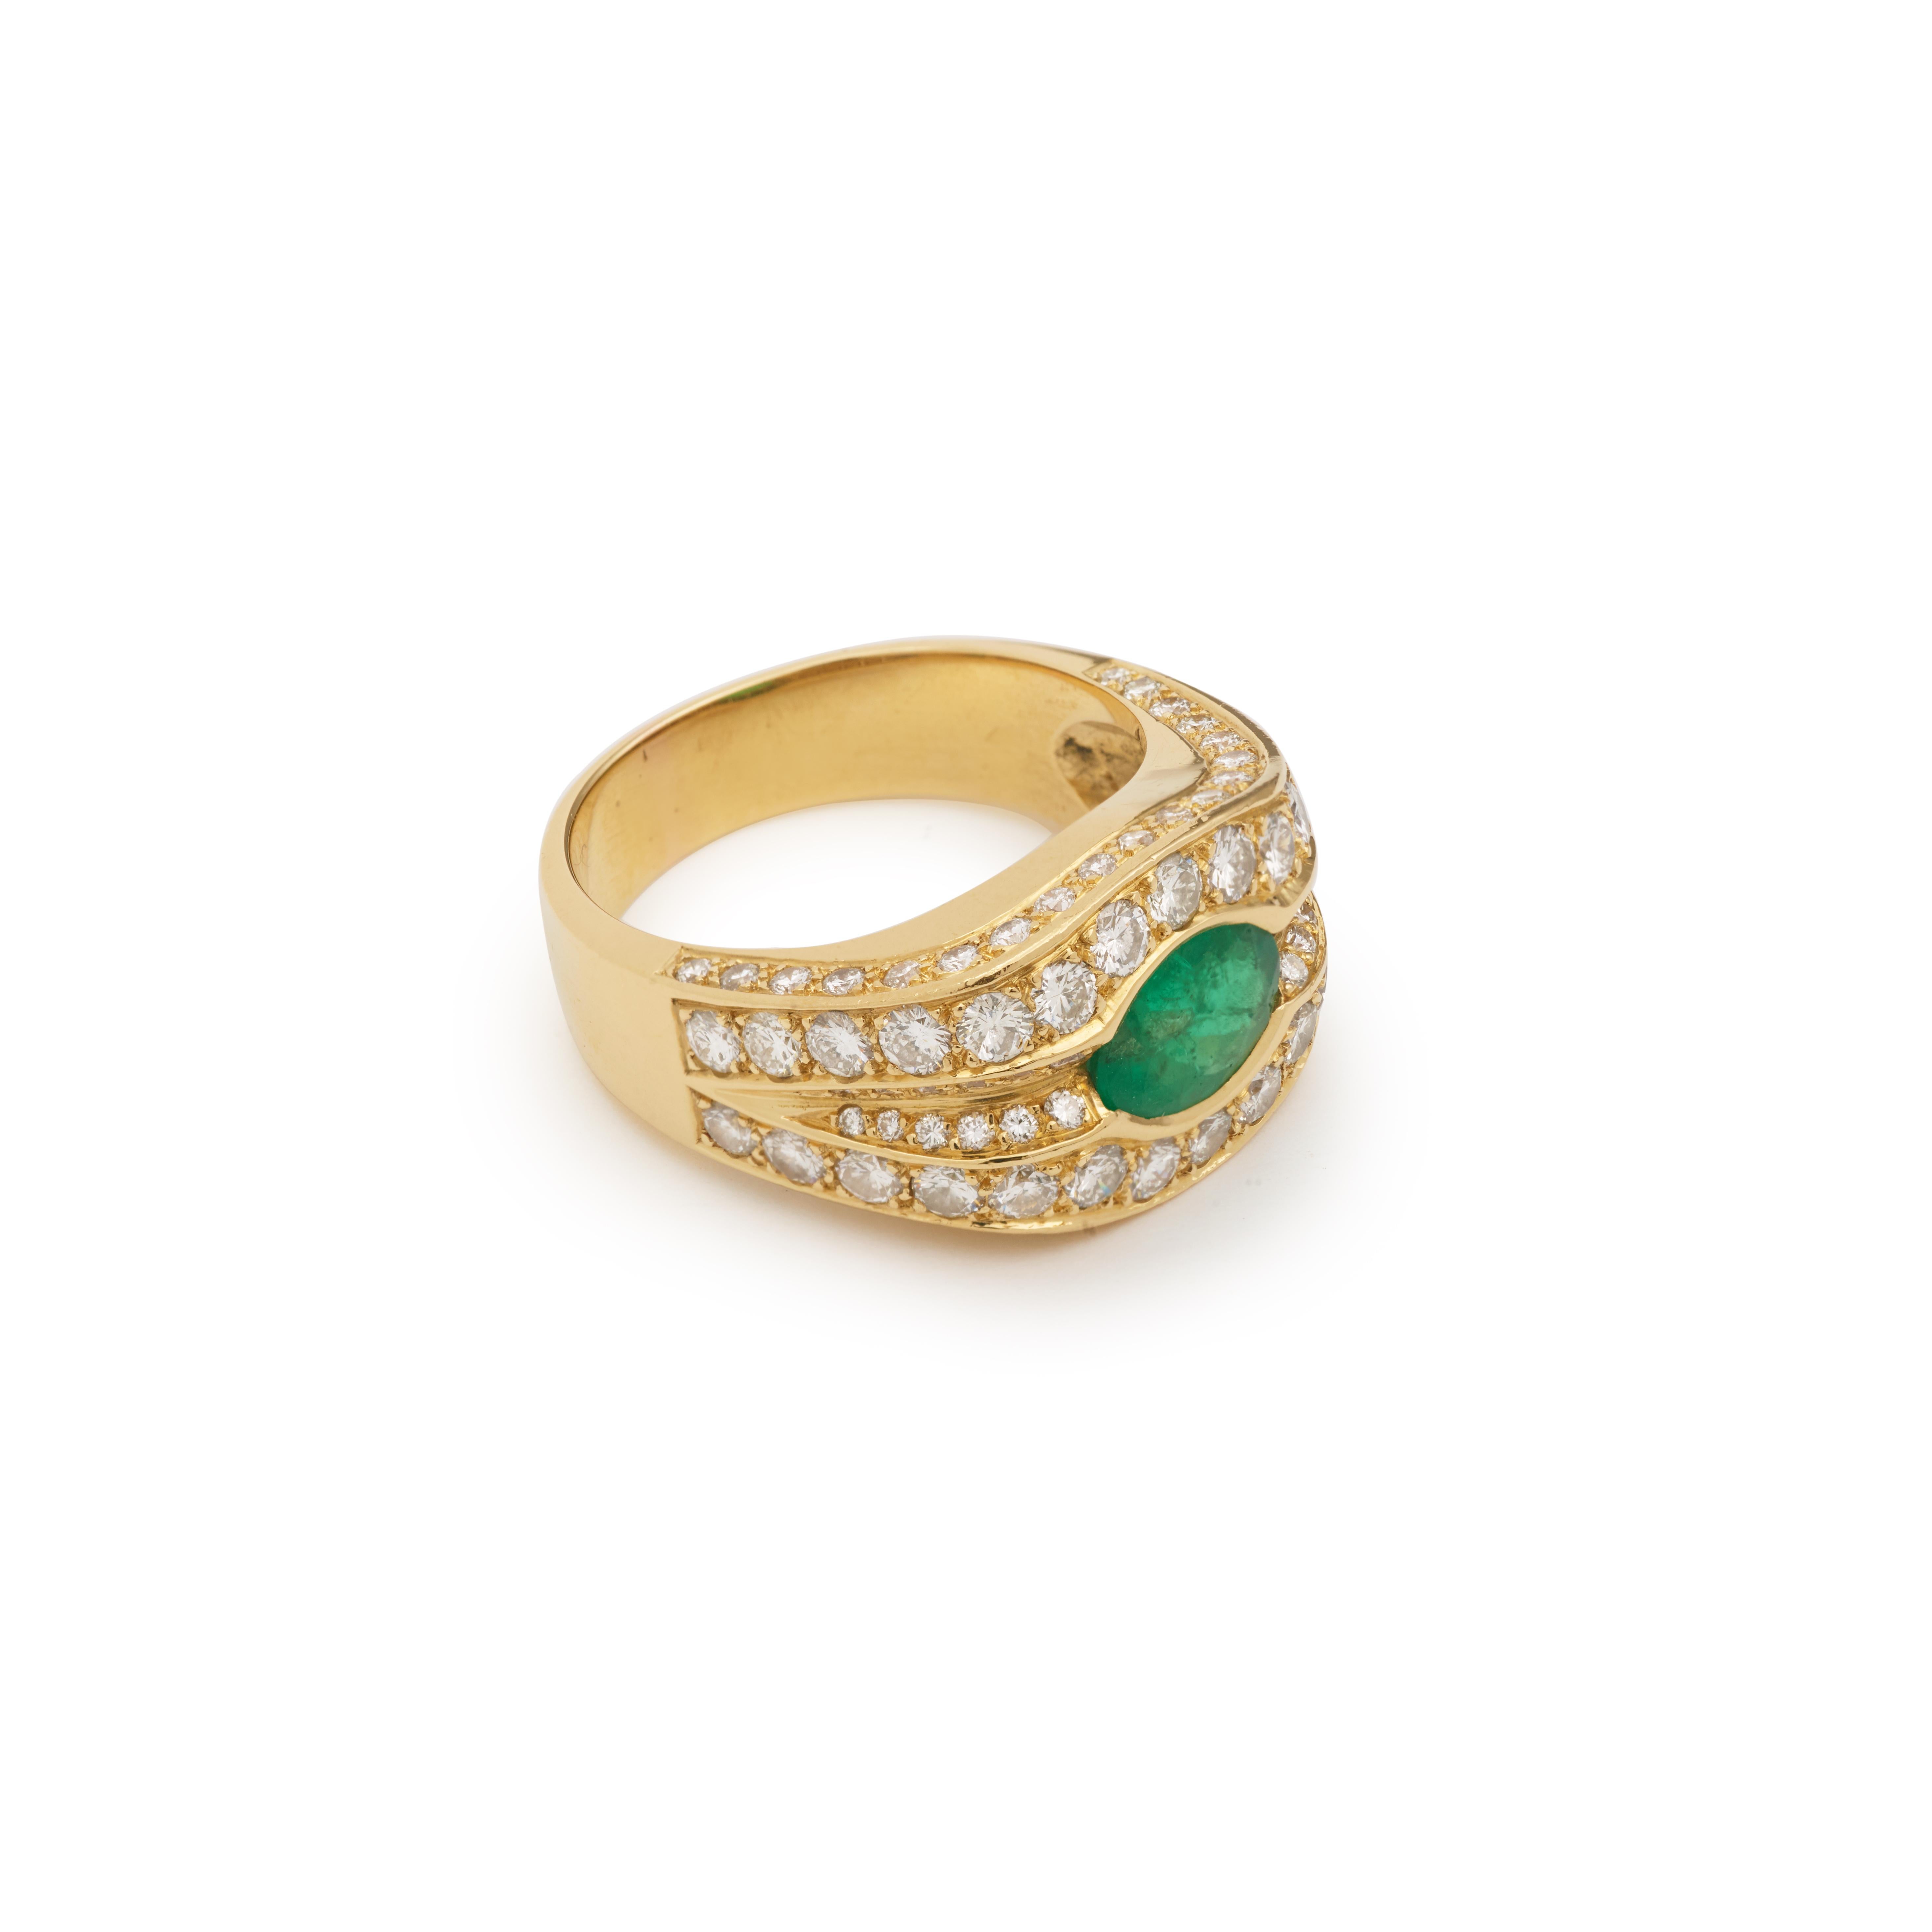 Splendid yellow gold ring set with modern cut diamonds enhancing a very beautiful oval cut emerald.

Weight of the emerald: 0.50 carats

Total diamond weight: 2.50 carats

Dimensions: 1.70 x 1.33 x 0.58 cm (0.67 x 0.51 x 0.20 inch)

Finger size: 61